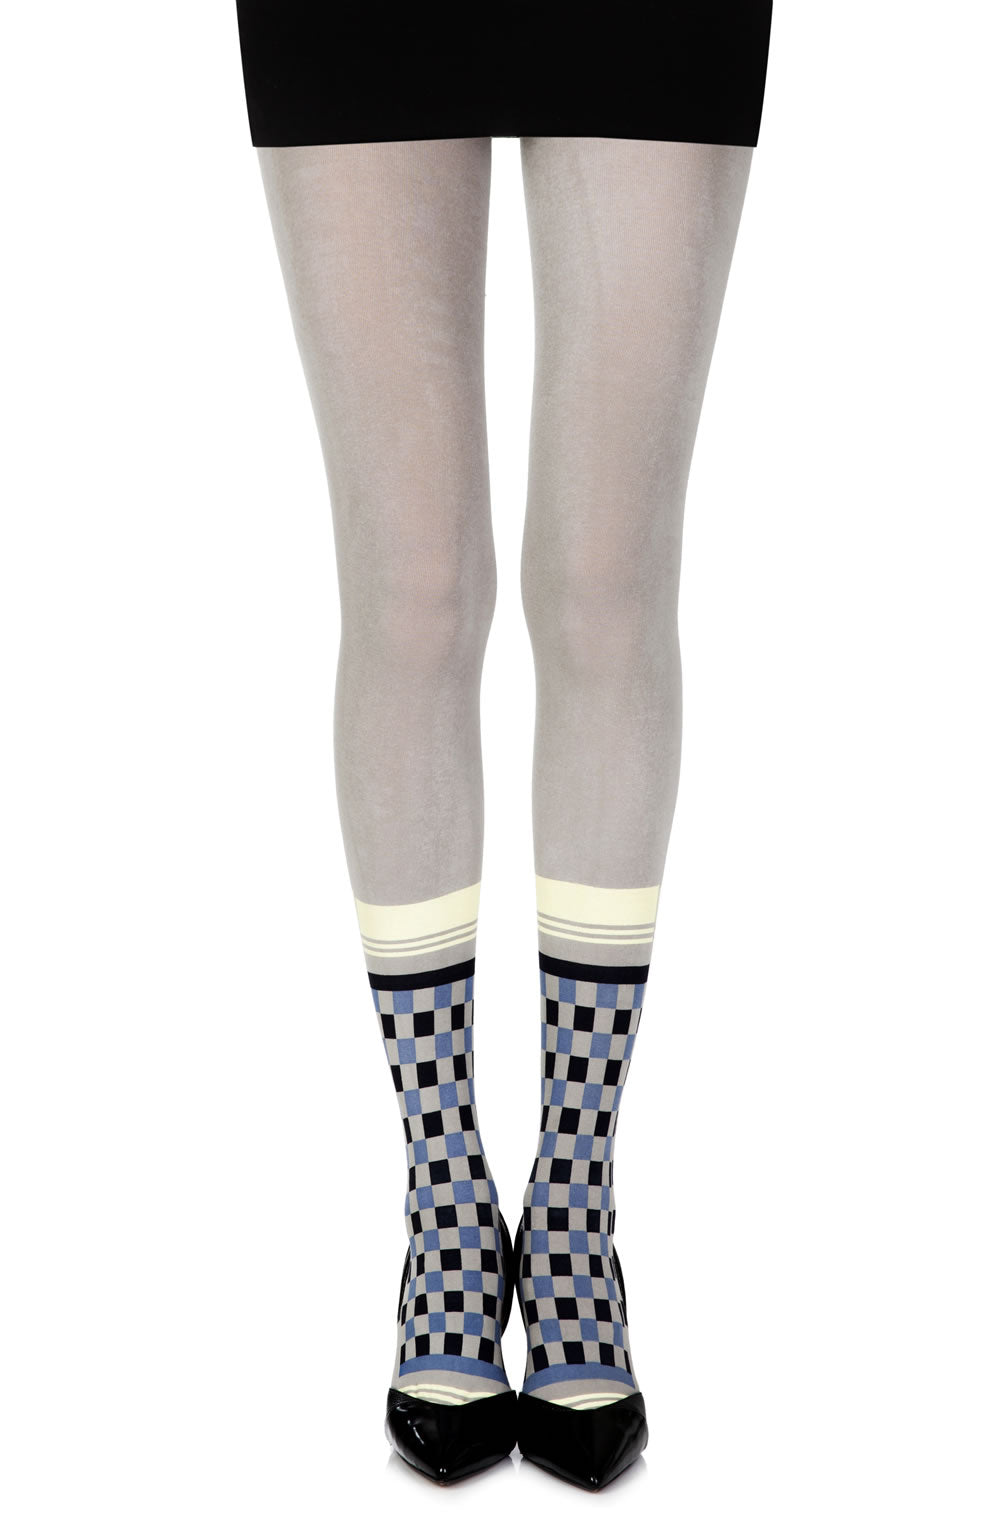 Zohara “Happy Socks” Grey/ulti Print Tights  Hosiery, NEWLY-IMPORTED, Tights, Zohara - So Luxe Lingerie